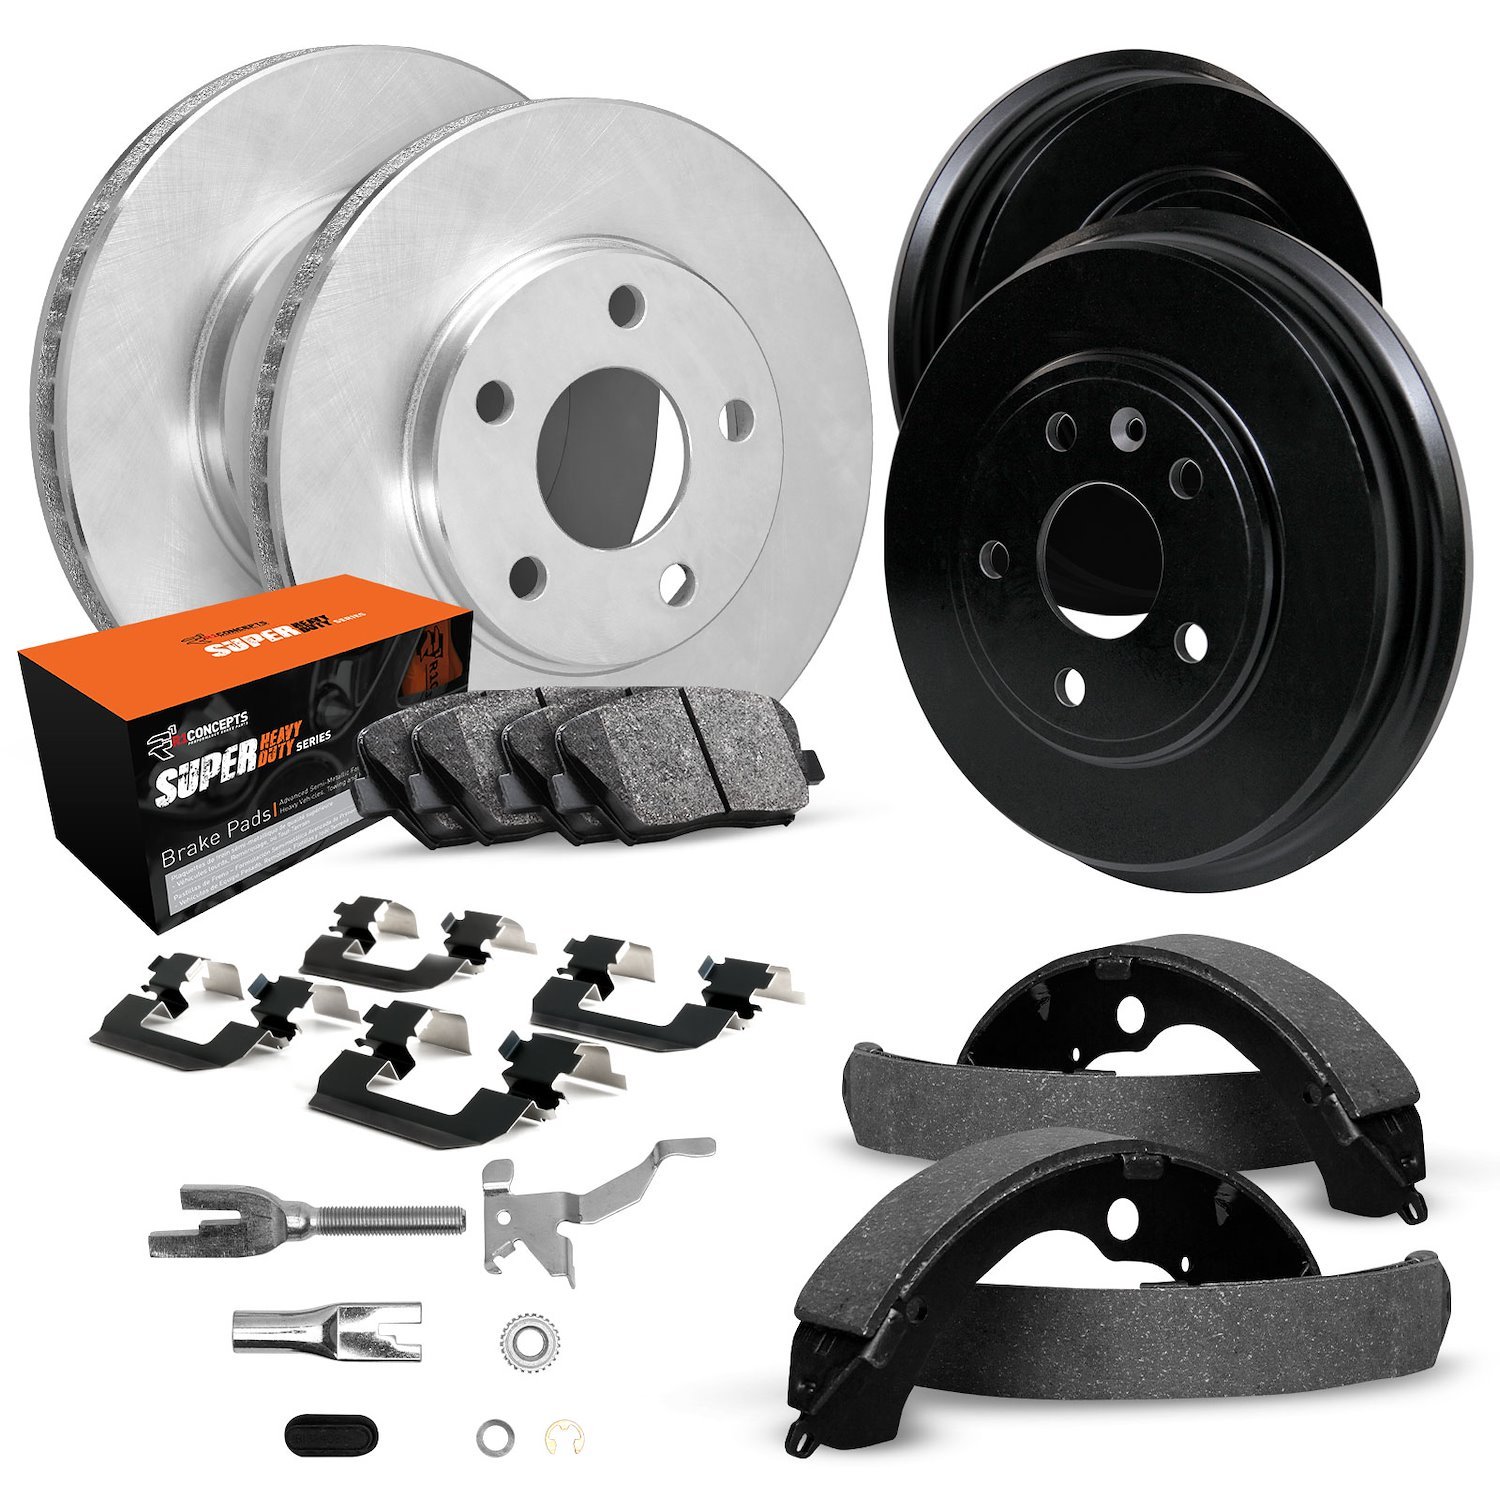 E-Line Blank Brake Rotor & Drum Set w/Super-Duty Pads, Shoes, Hardware, & Adjusters, 1995-1999 Ford/Lincoln/Mercury/Mazda